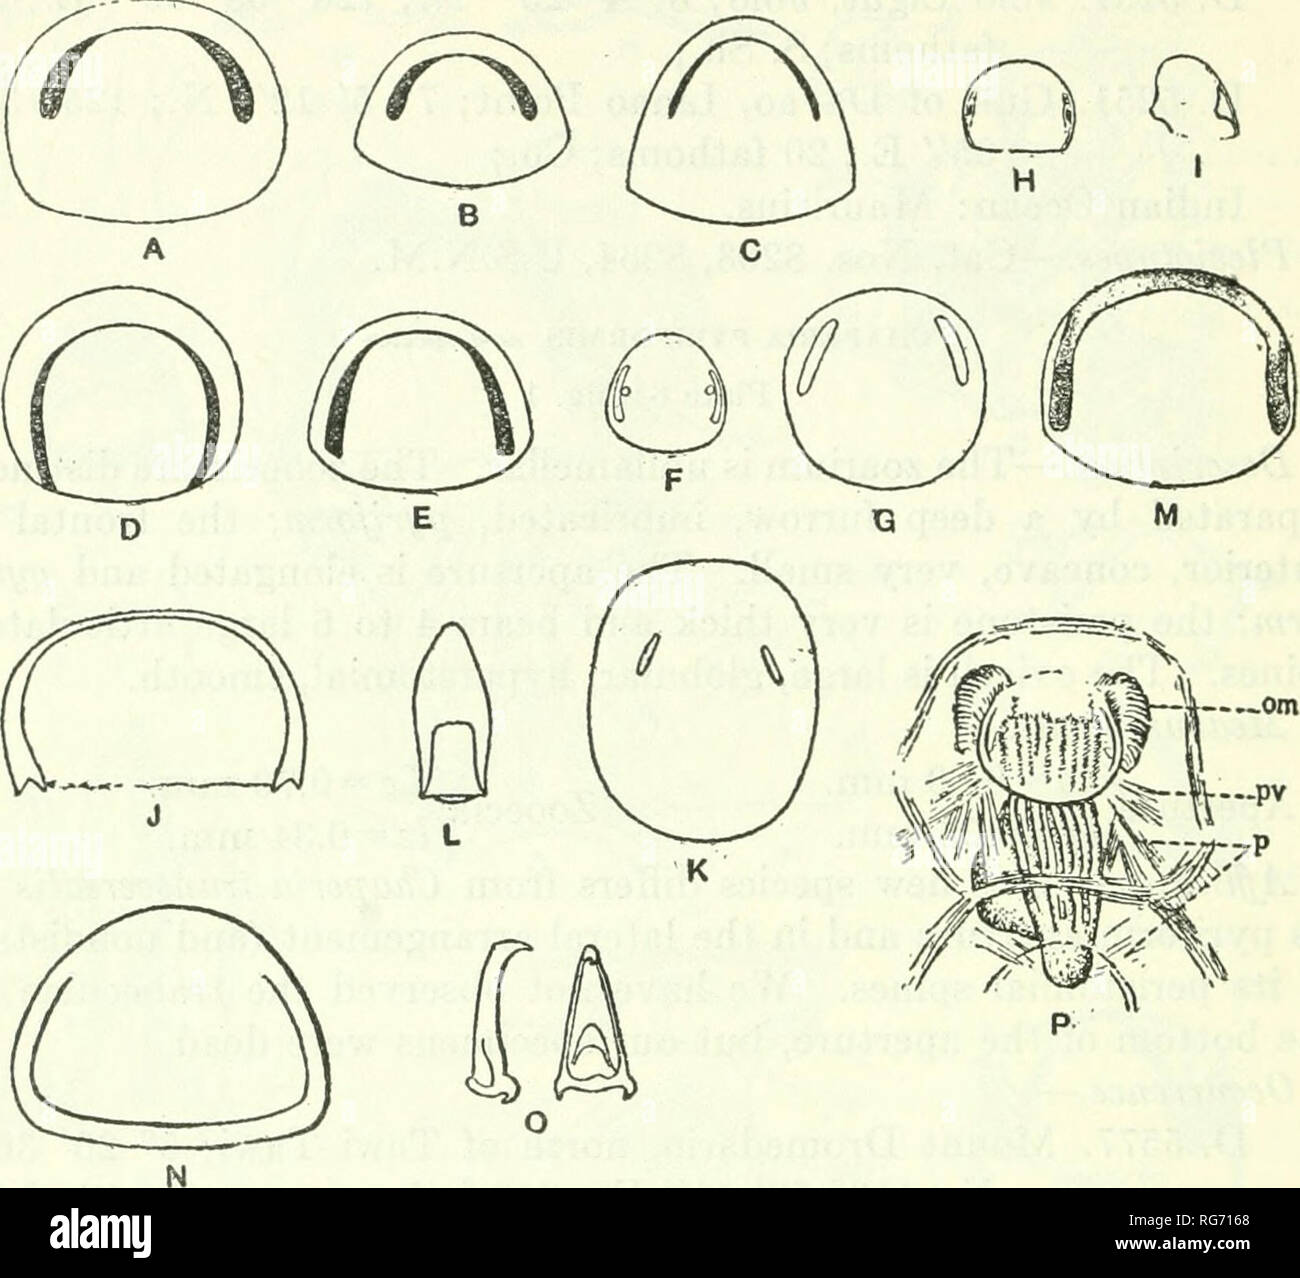 . Bulletin - United States National Museum. Science. 472 BULLETIN 100, UNITED STATES NATIONAL MUSEUM. Fig. 201.—Genus Chaperia Jullien, 1881 A-C. Chaperia transversalis Opercula, X85. D-G. Chaperia acanthina Quoy and Gaimard, 1824. Four opercula. (F. After Kirkpatrick, 1890; G, X85. After Waters, 1895.) H, I. Chaperia spinosissima Calvet, 1904. Two opercula. (After Calvet, 1904.) J, K, L. Chaperia galeata var. bilaminata Waters, 1898. J. Operculum of ovicell. K. Operculum of the aperture. L. Avicularian mandible, X85. (After Waters, 1898.) M. Chaperia capensis Busk, 1884. Operculum. N, O. Chap Stock Photo